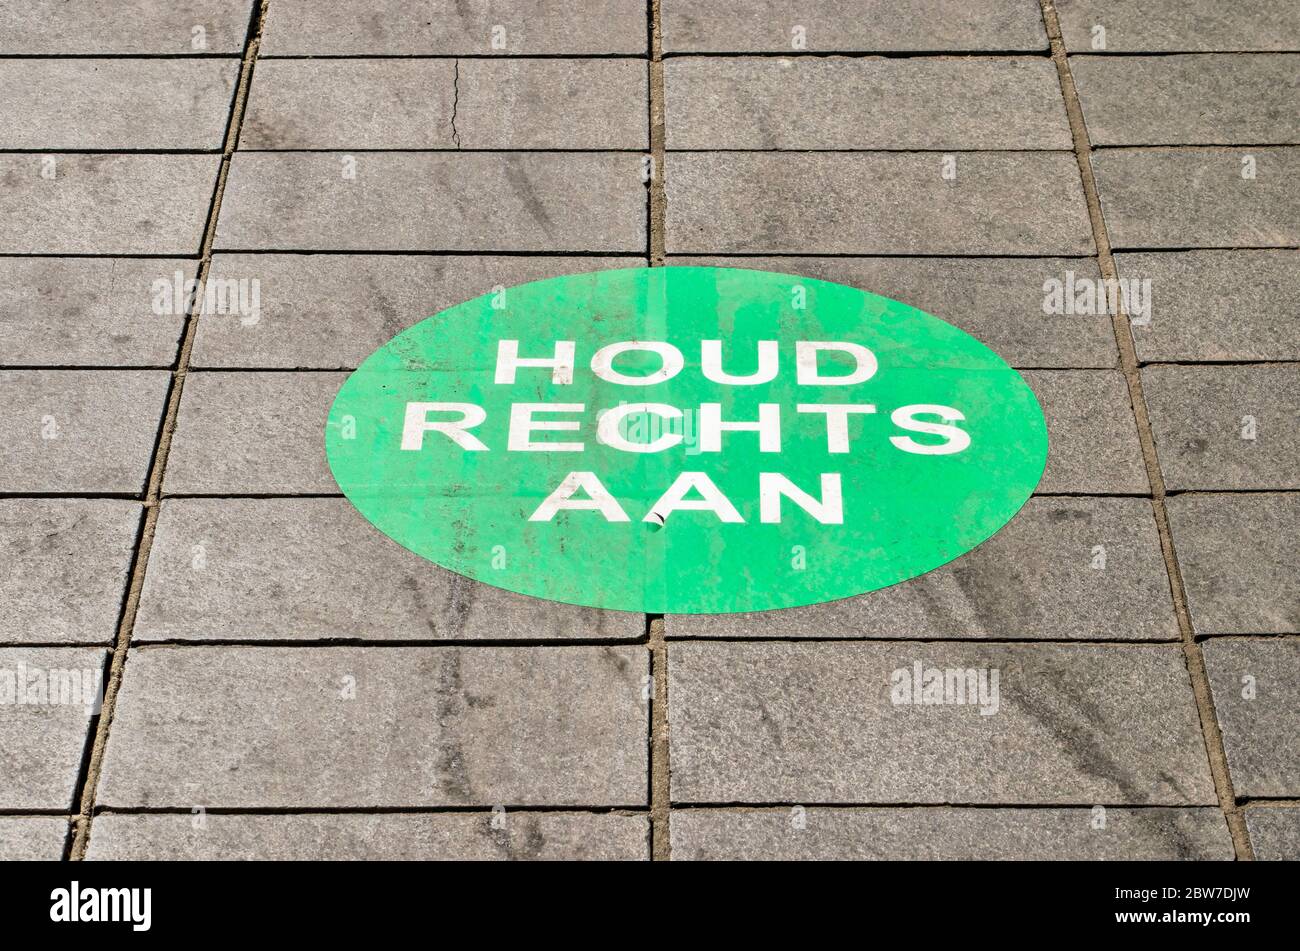 Rotterdam, The Netherlands, May 17, 2020: pavement tiles at Lijnbaan shopping street with large sticker calling for pepole to keep right to prevent sp Stock Photo